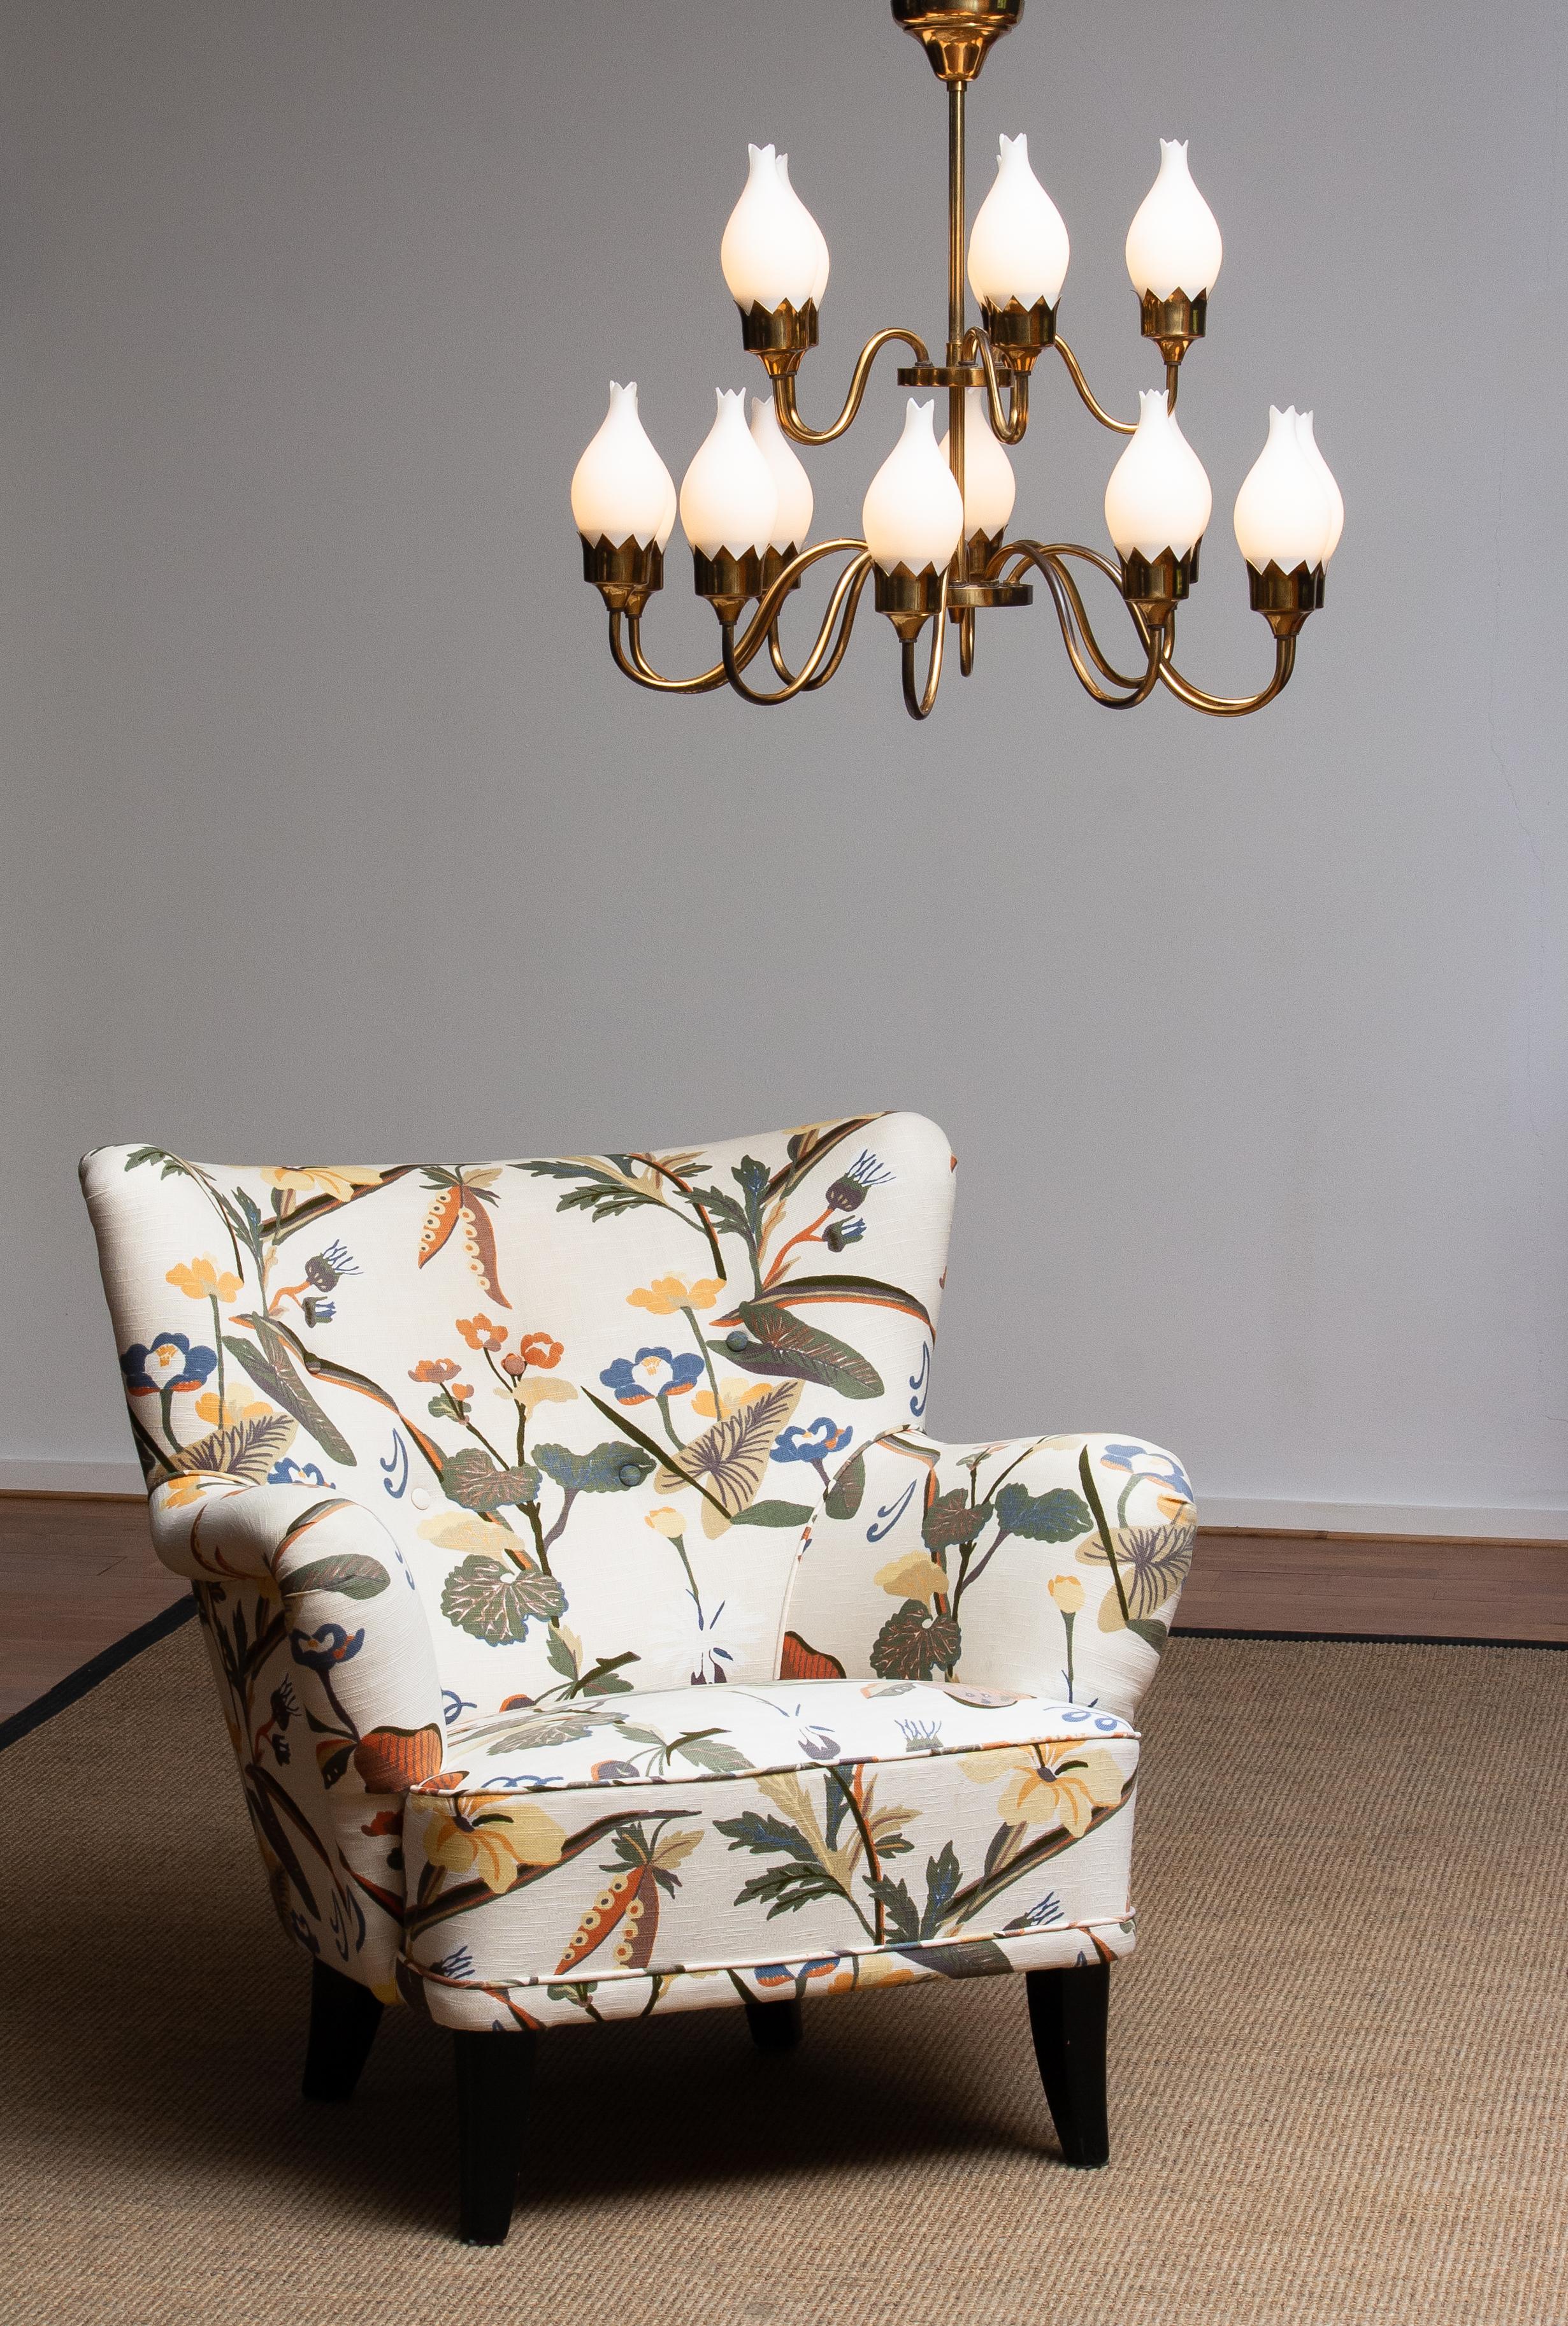 Mid-20th Century 1950s, Brass and White Glass Opaline Arm Chandelier by Fog & Mørup with Tulips